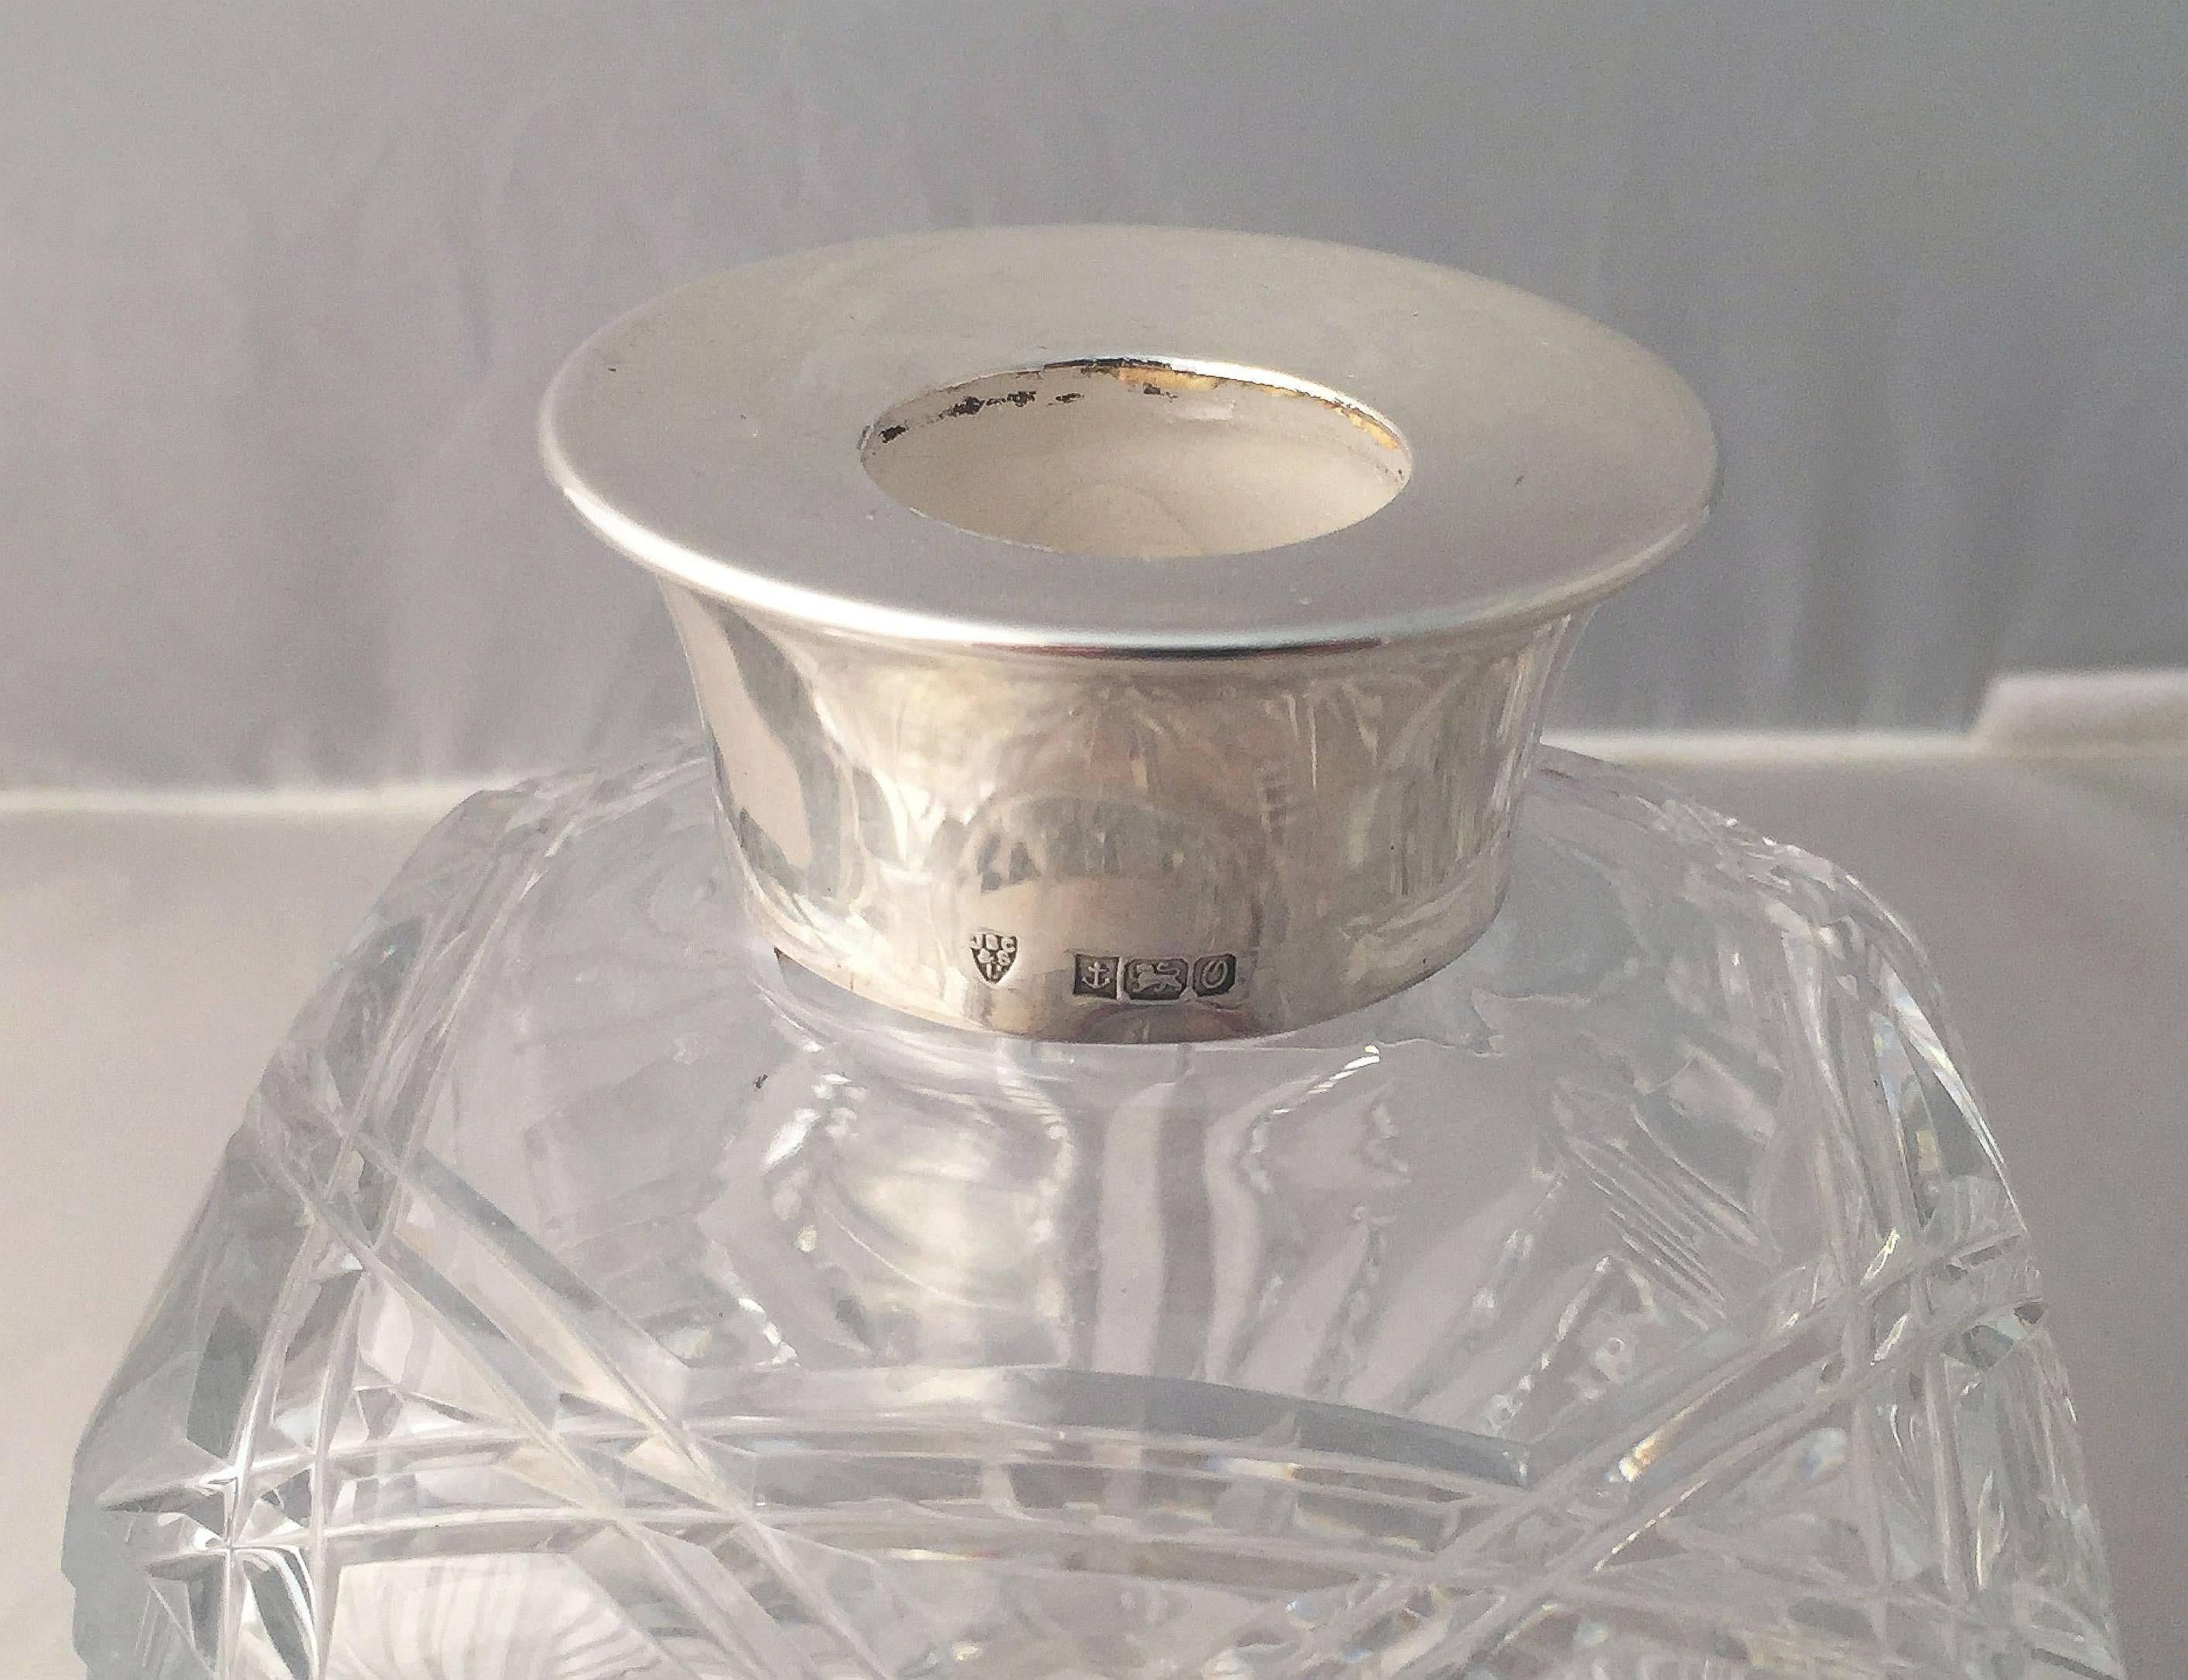 20th Century English Cut Crystal Spirits or Whiskey Decanter with Sterling Silver Collar